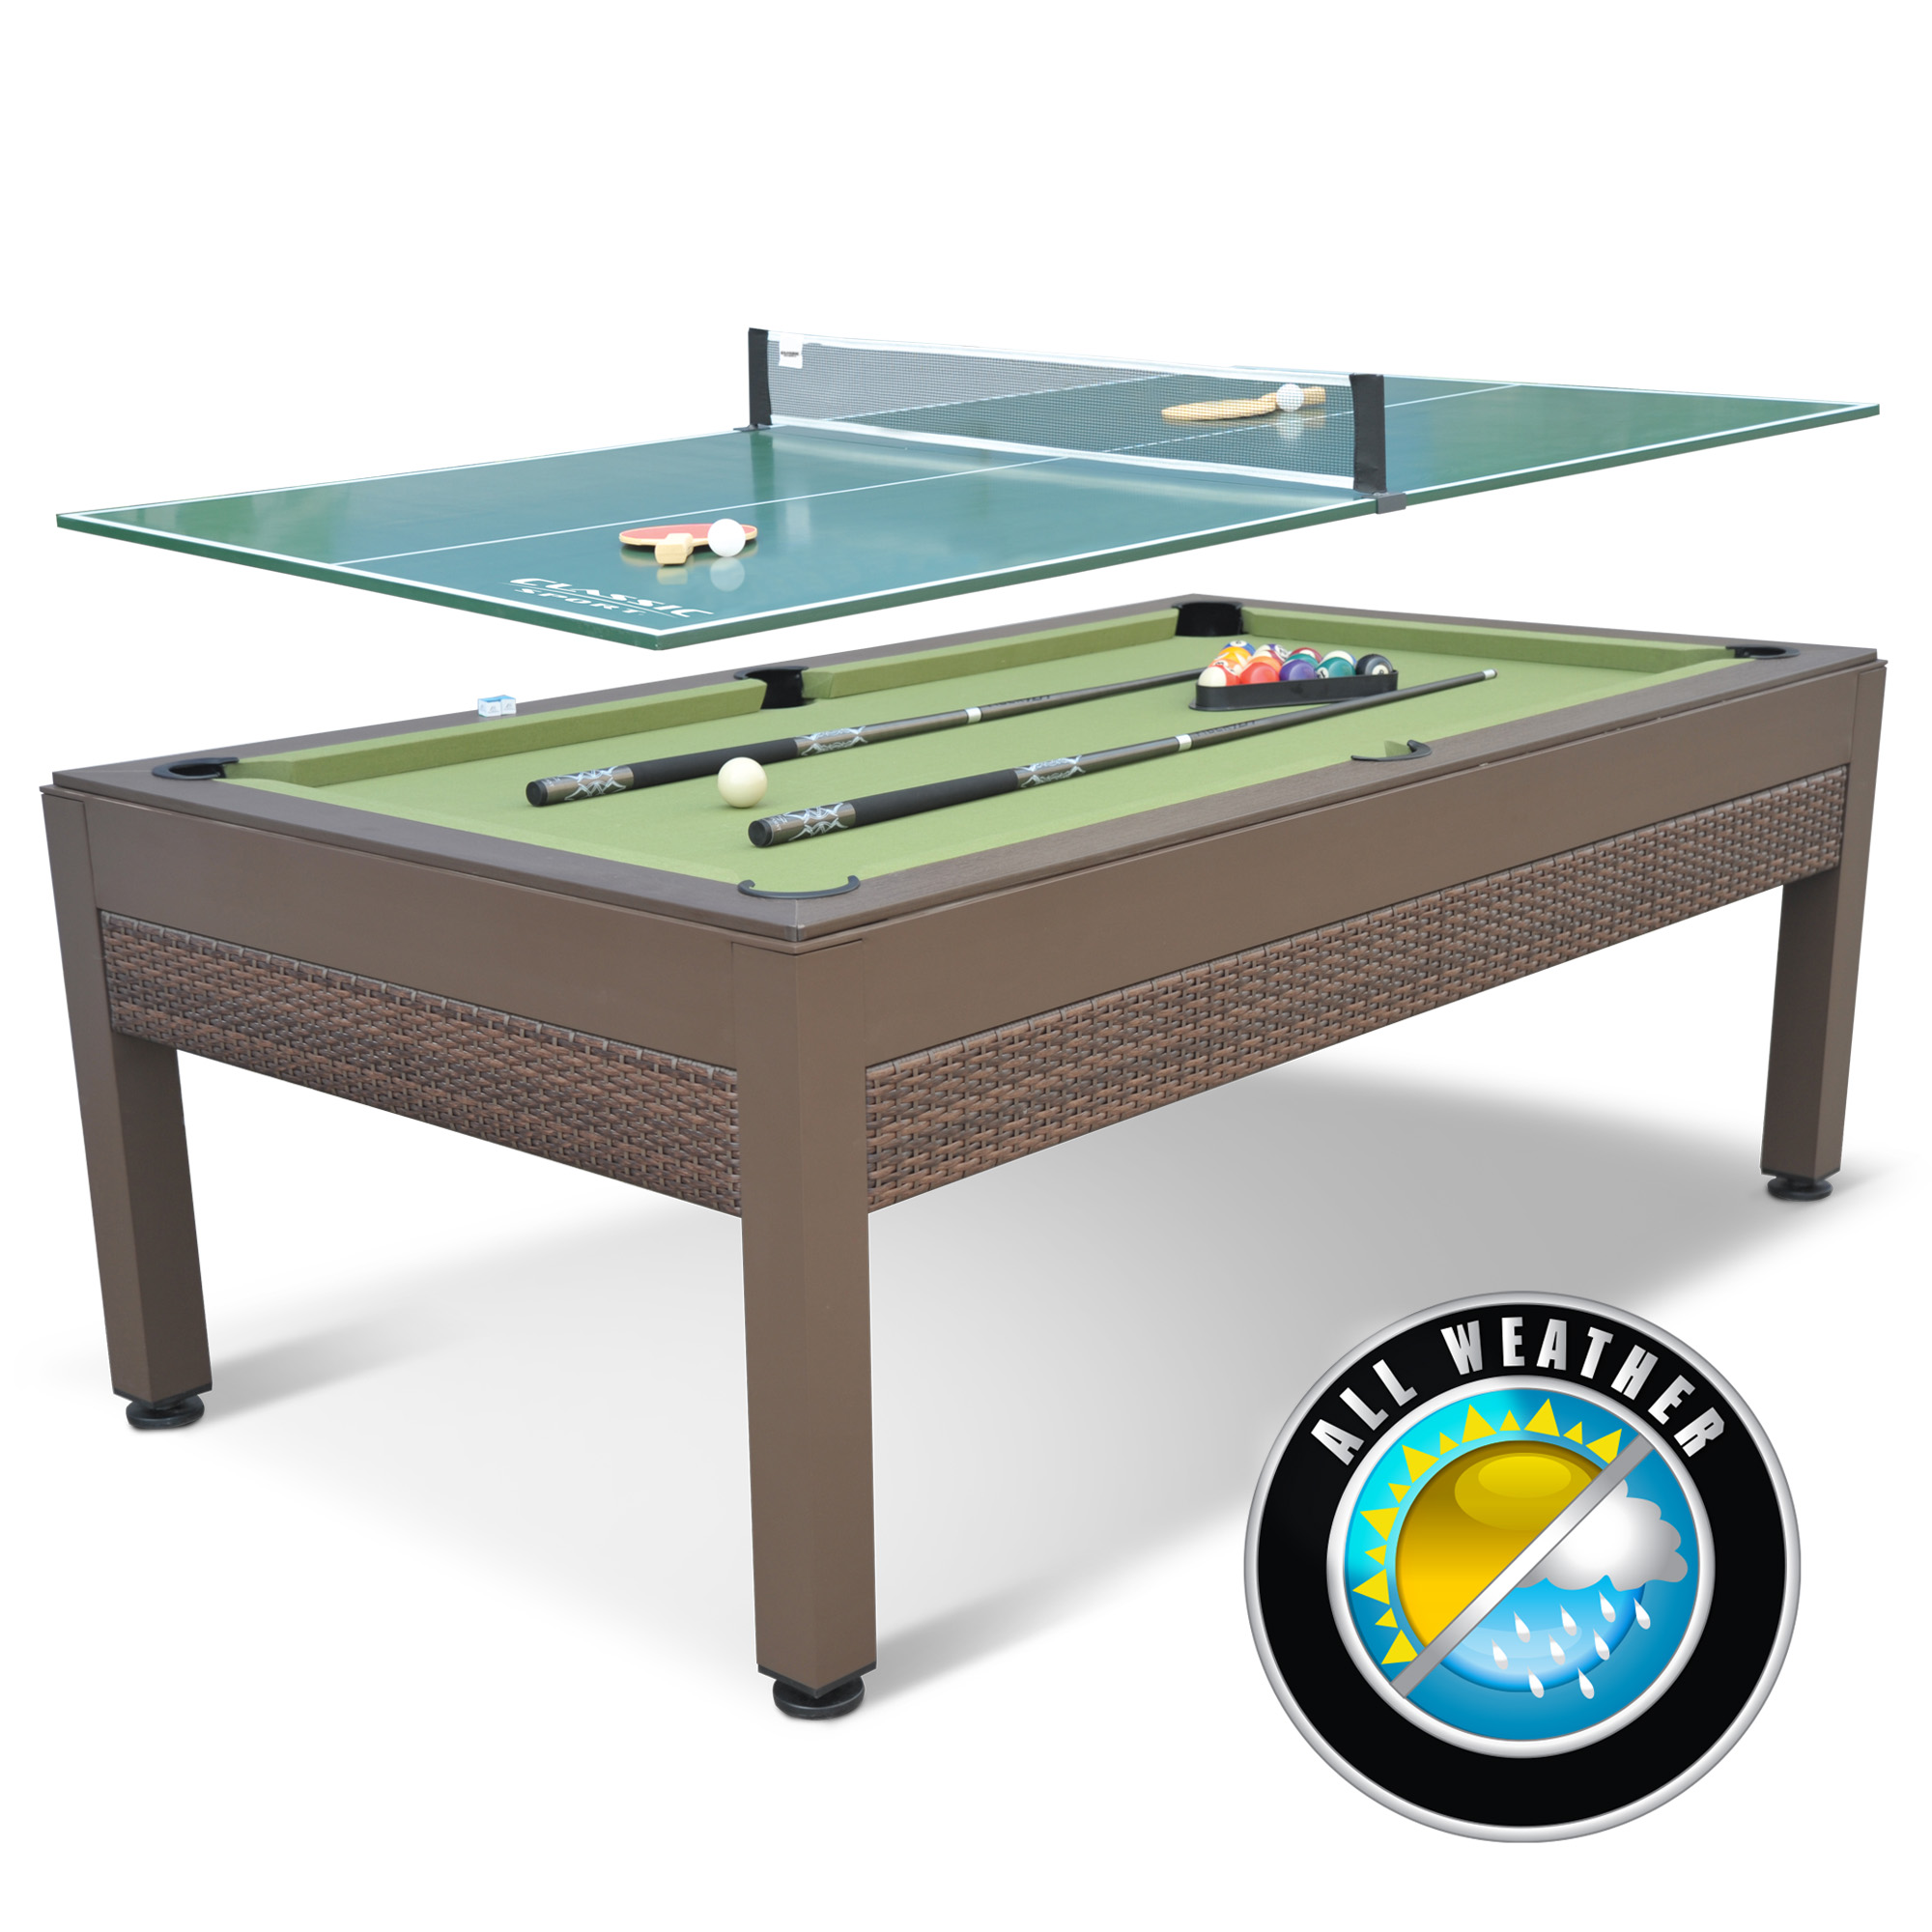 Classic Sport 84" Outdoor Wicker Billiard Table with Table Tennis Top - image 1 of 9